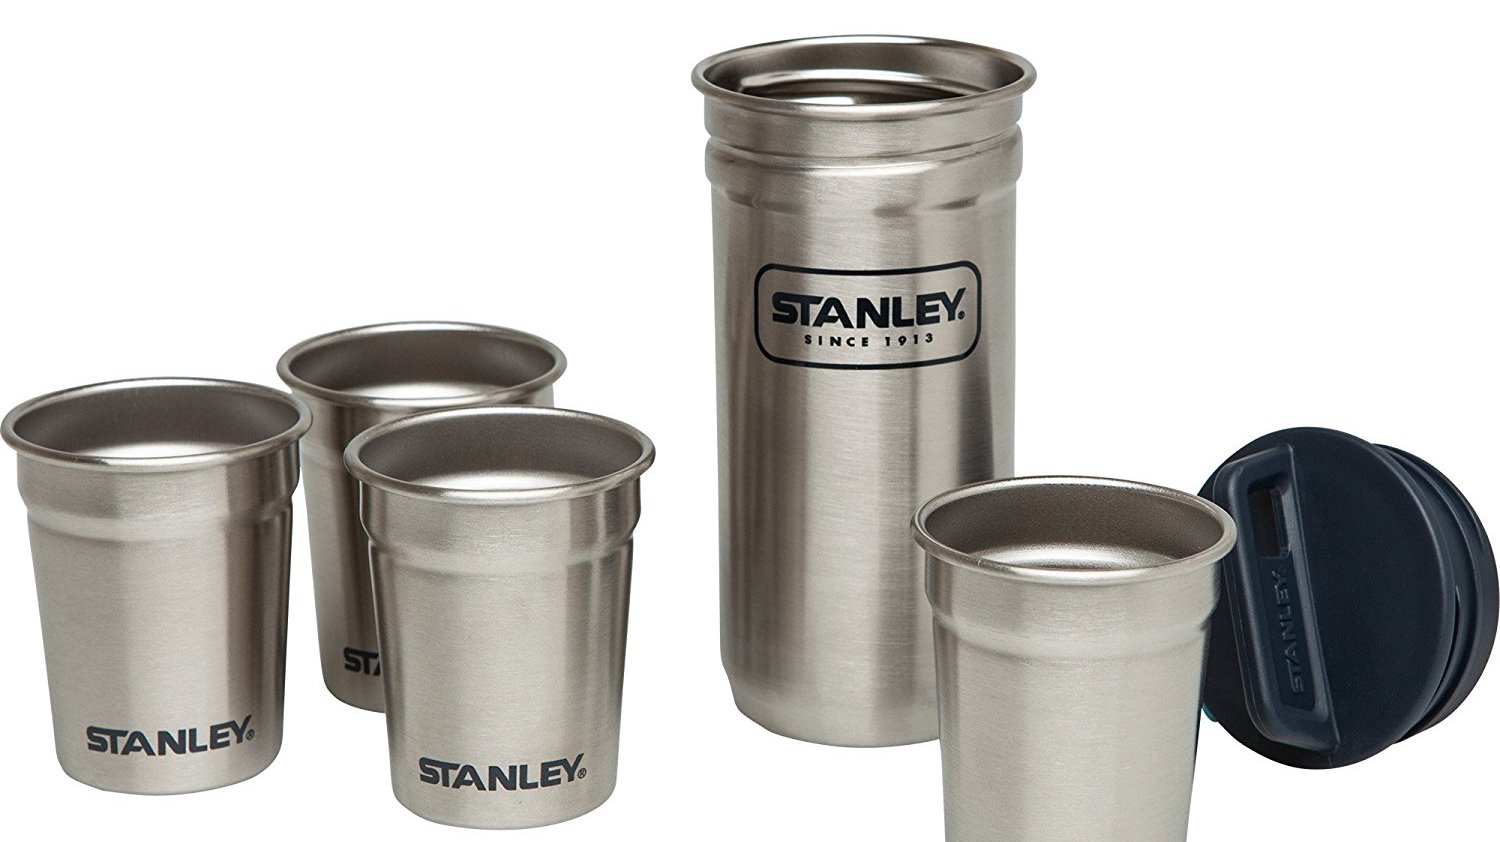 Stanley's Stainless Steel 2-Oz. Shot Glass Set is yours for just